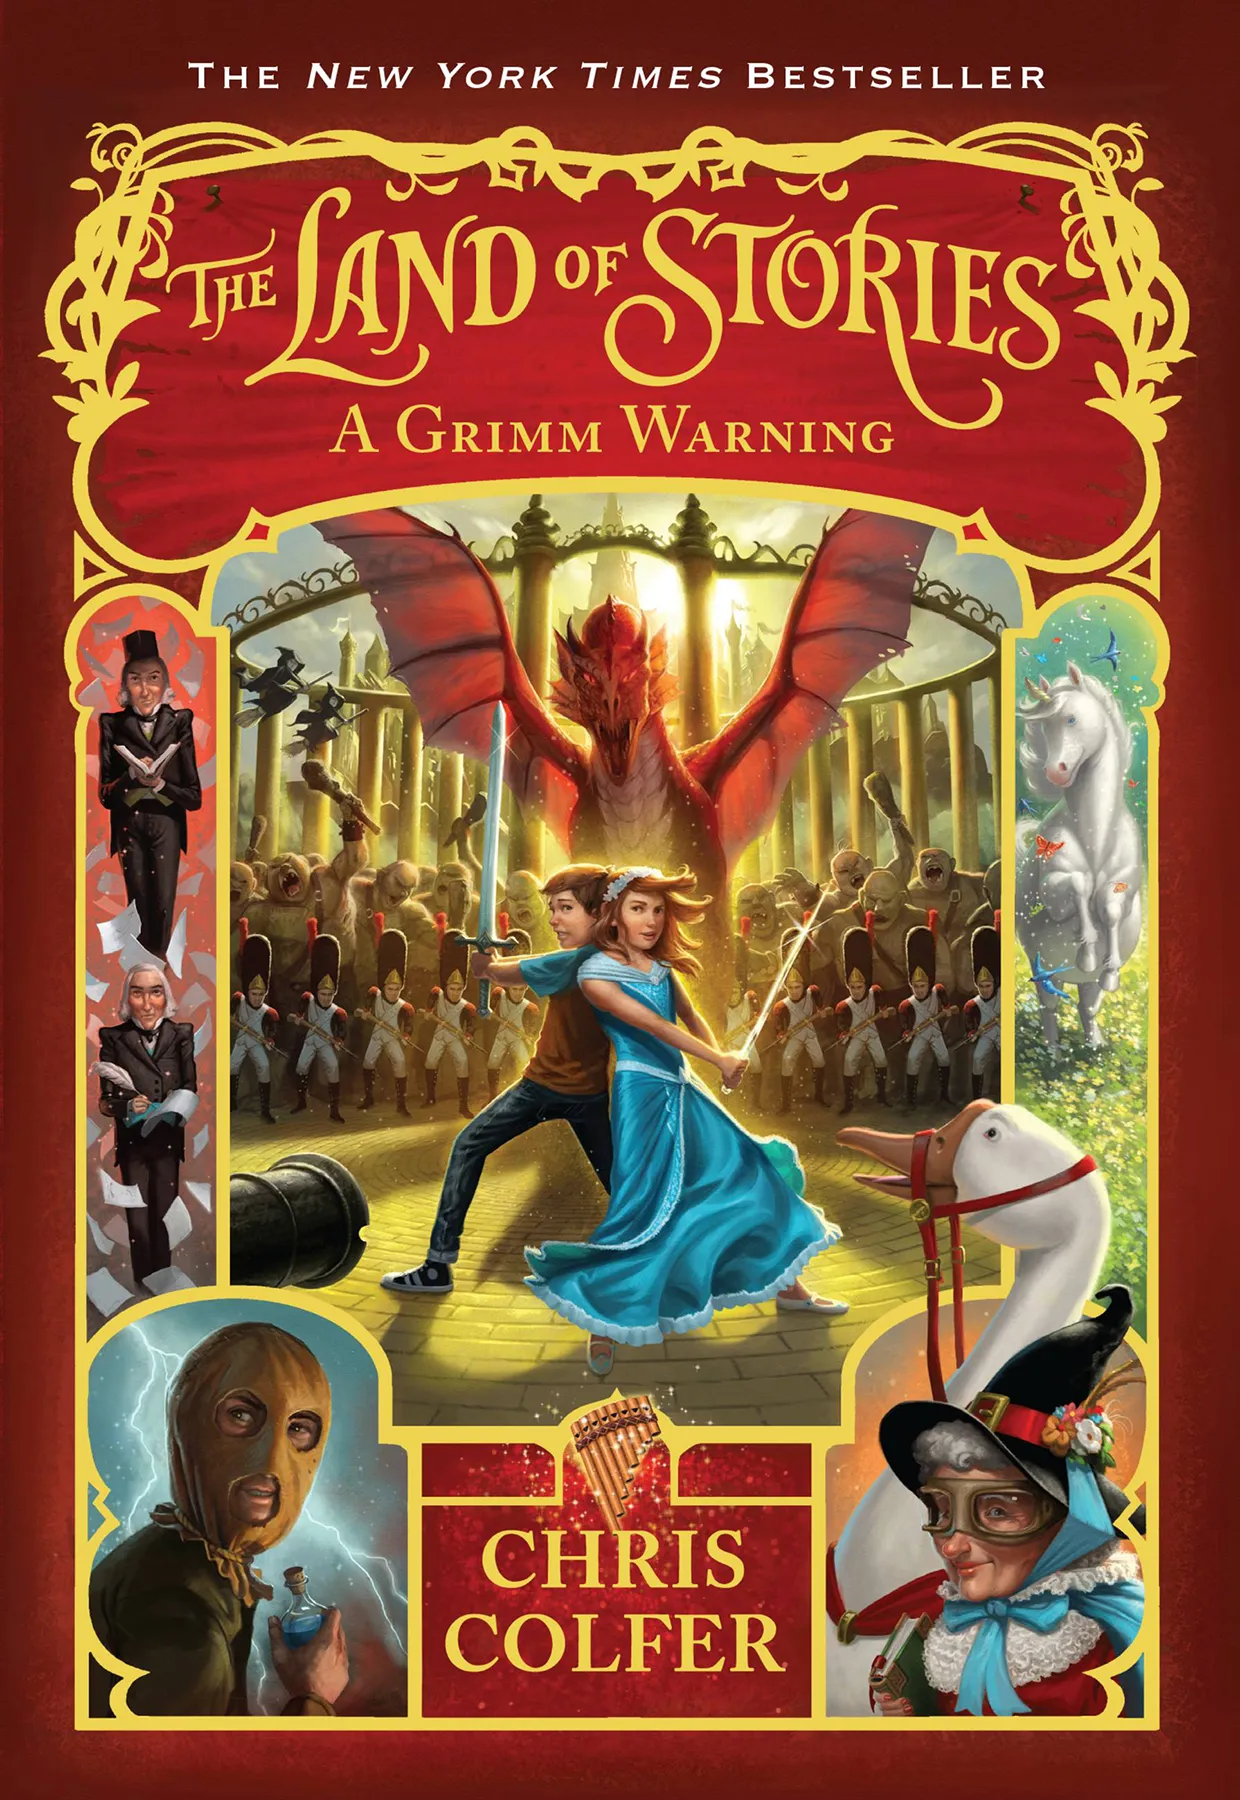 A Grimm Warning (The Land of Stories #3)